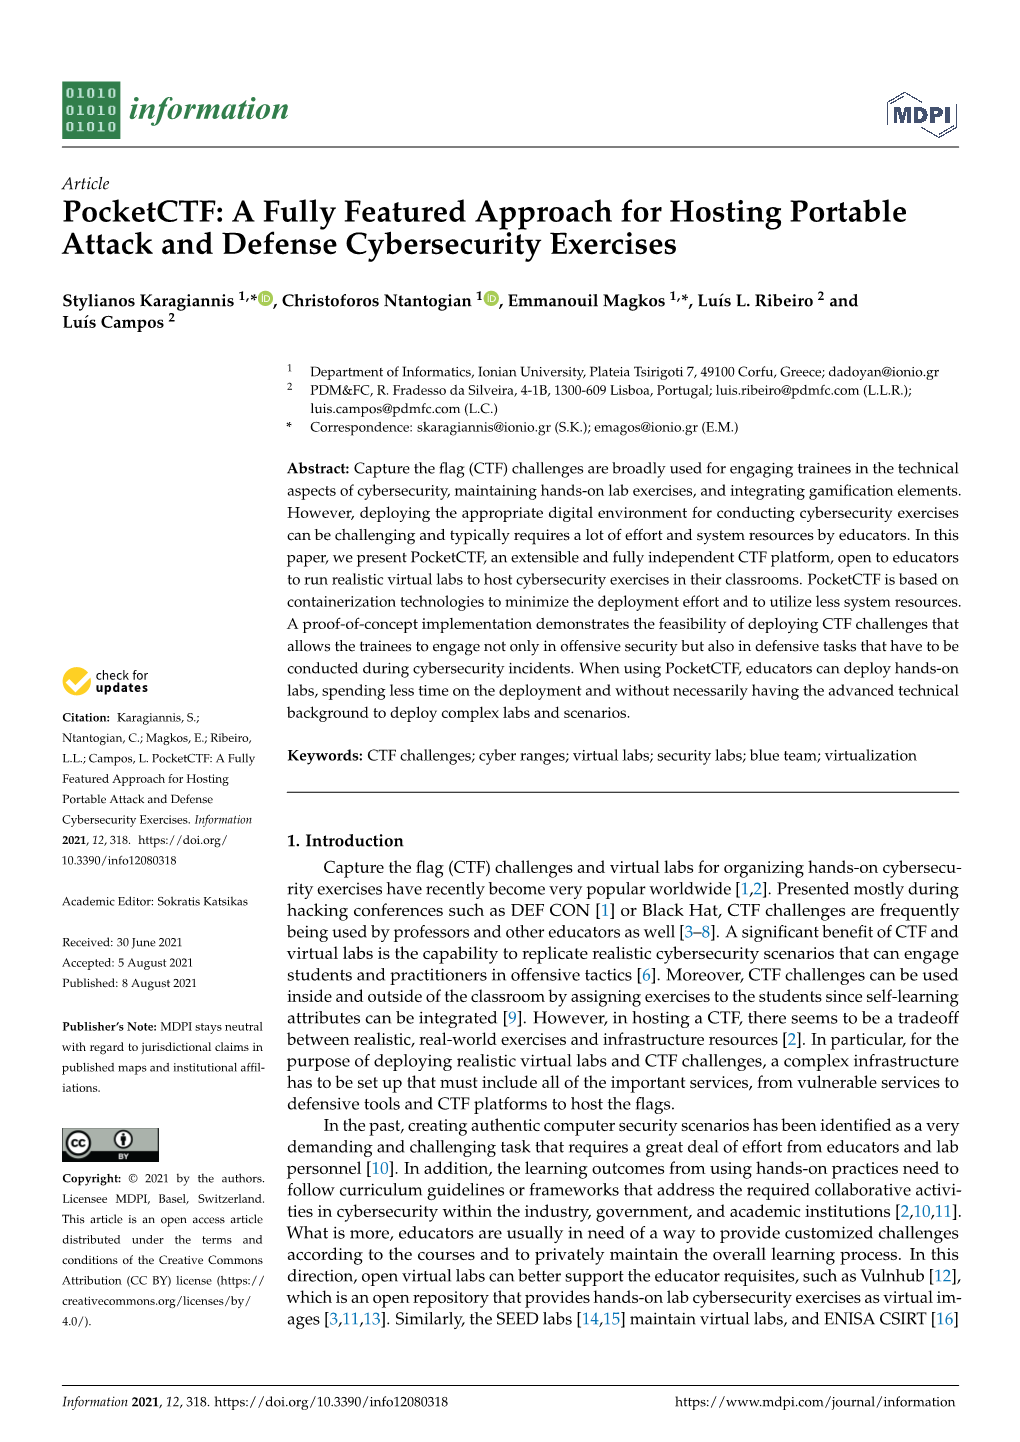 A Fully Featured Approach for Hosting Portable Attack and Defense Cybersecurity Exercises